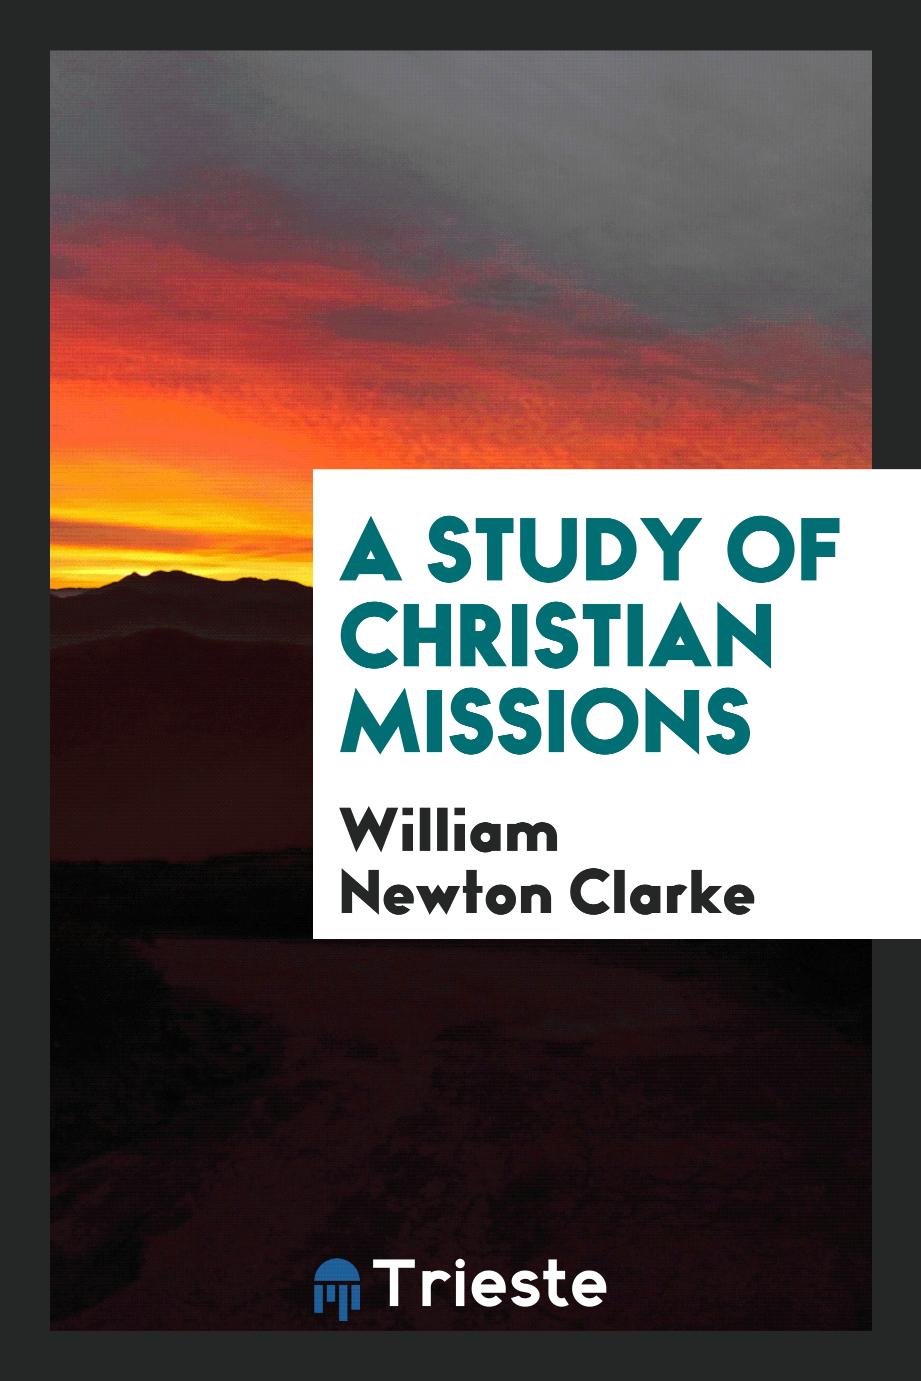 A study of Christian missions